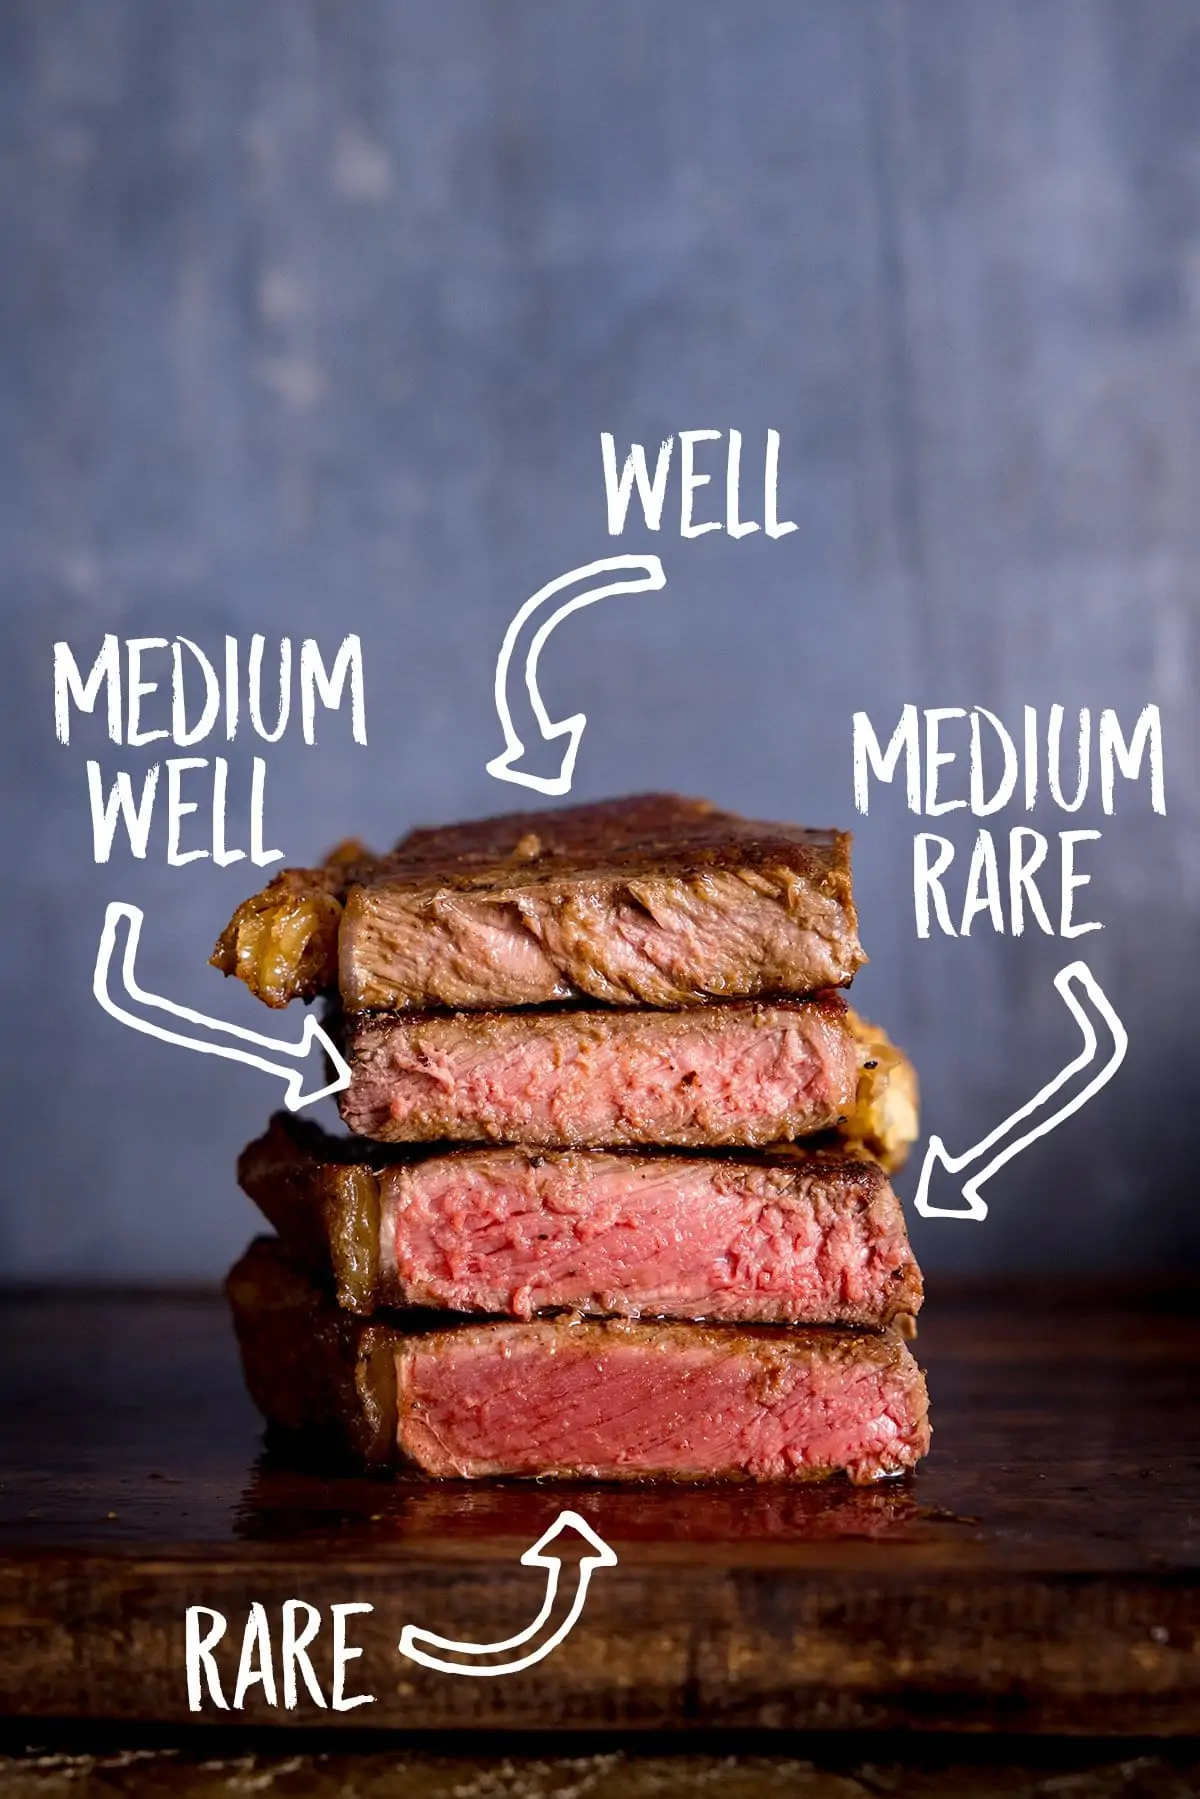 https://www.kitchensanctuary.com/wp-content/uploads/2021/09/How-to-cook-the-perfect-steak-tall-FS.webp